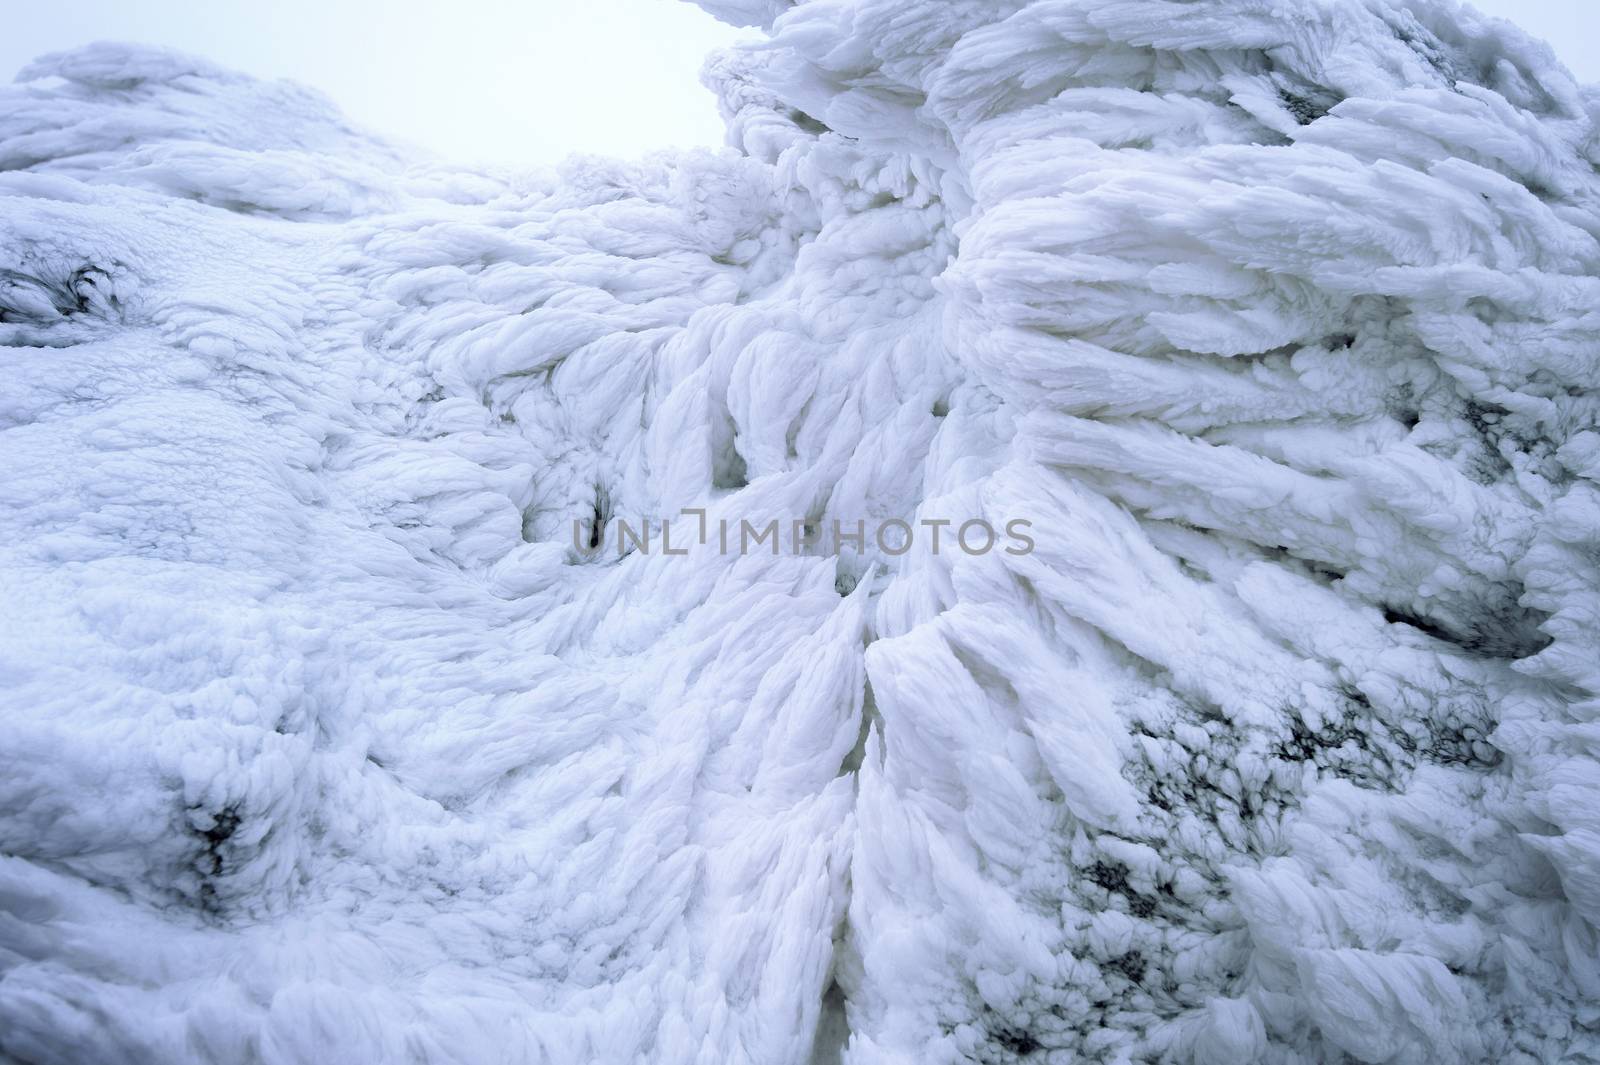 Wind painted Snow Texture Pattern on stone Background, Winter ba by gutarphotoghaphy